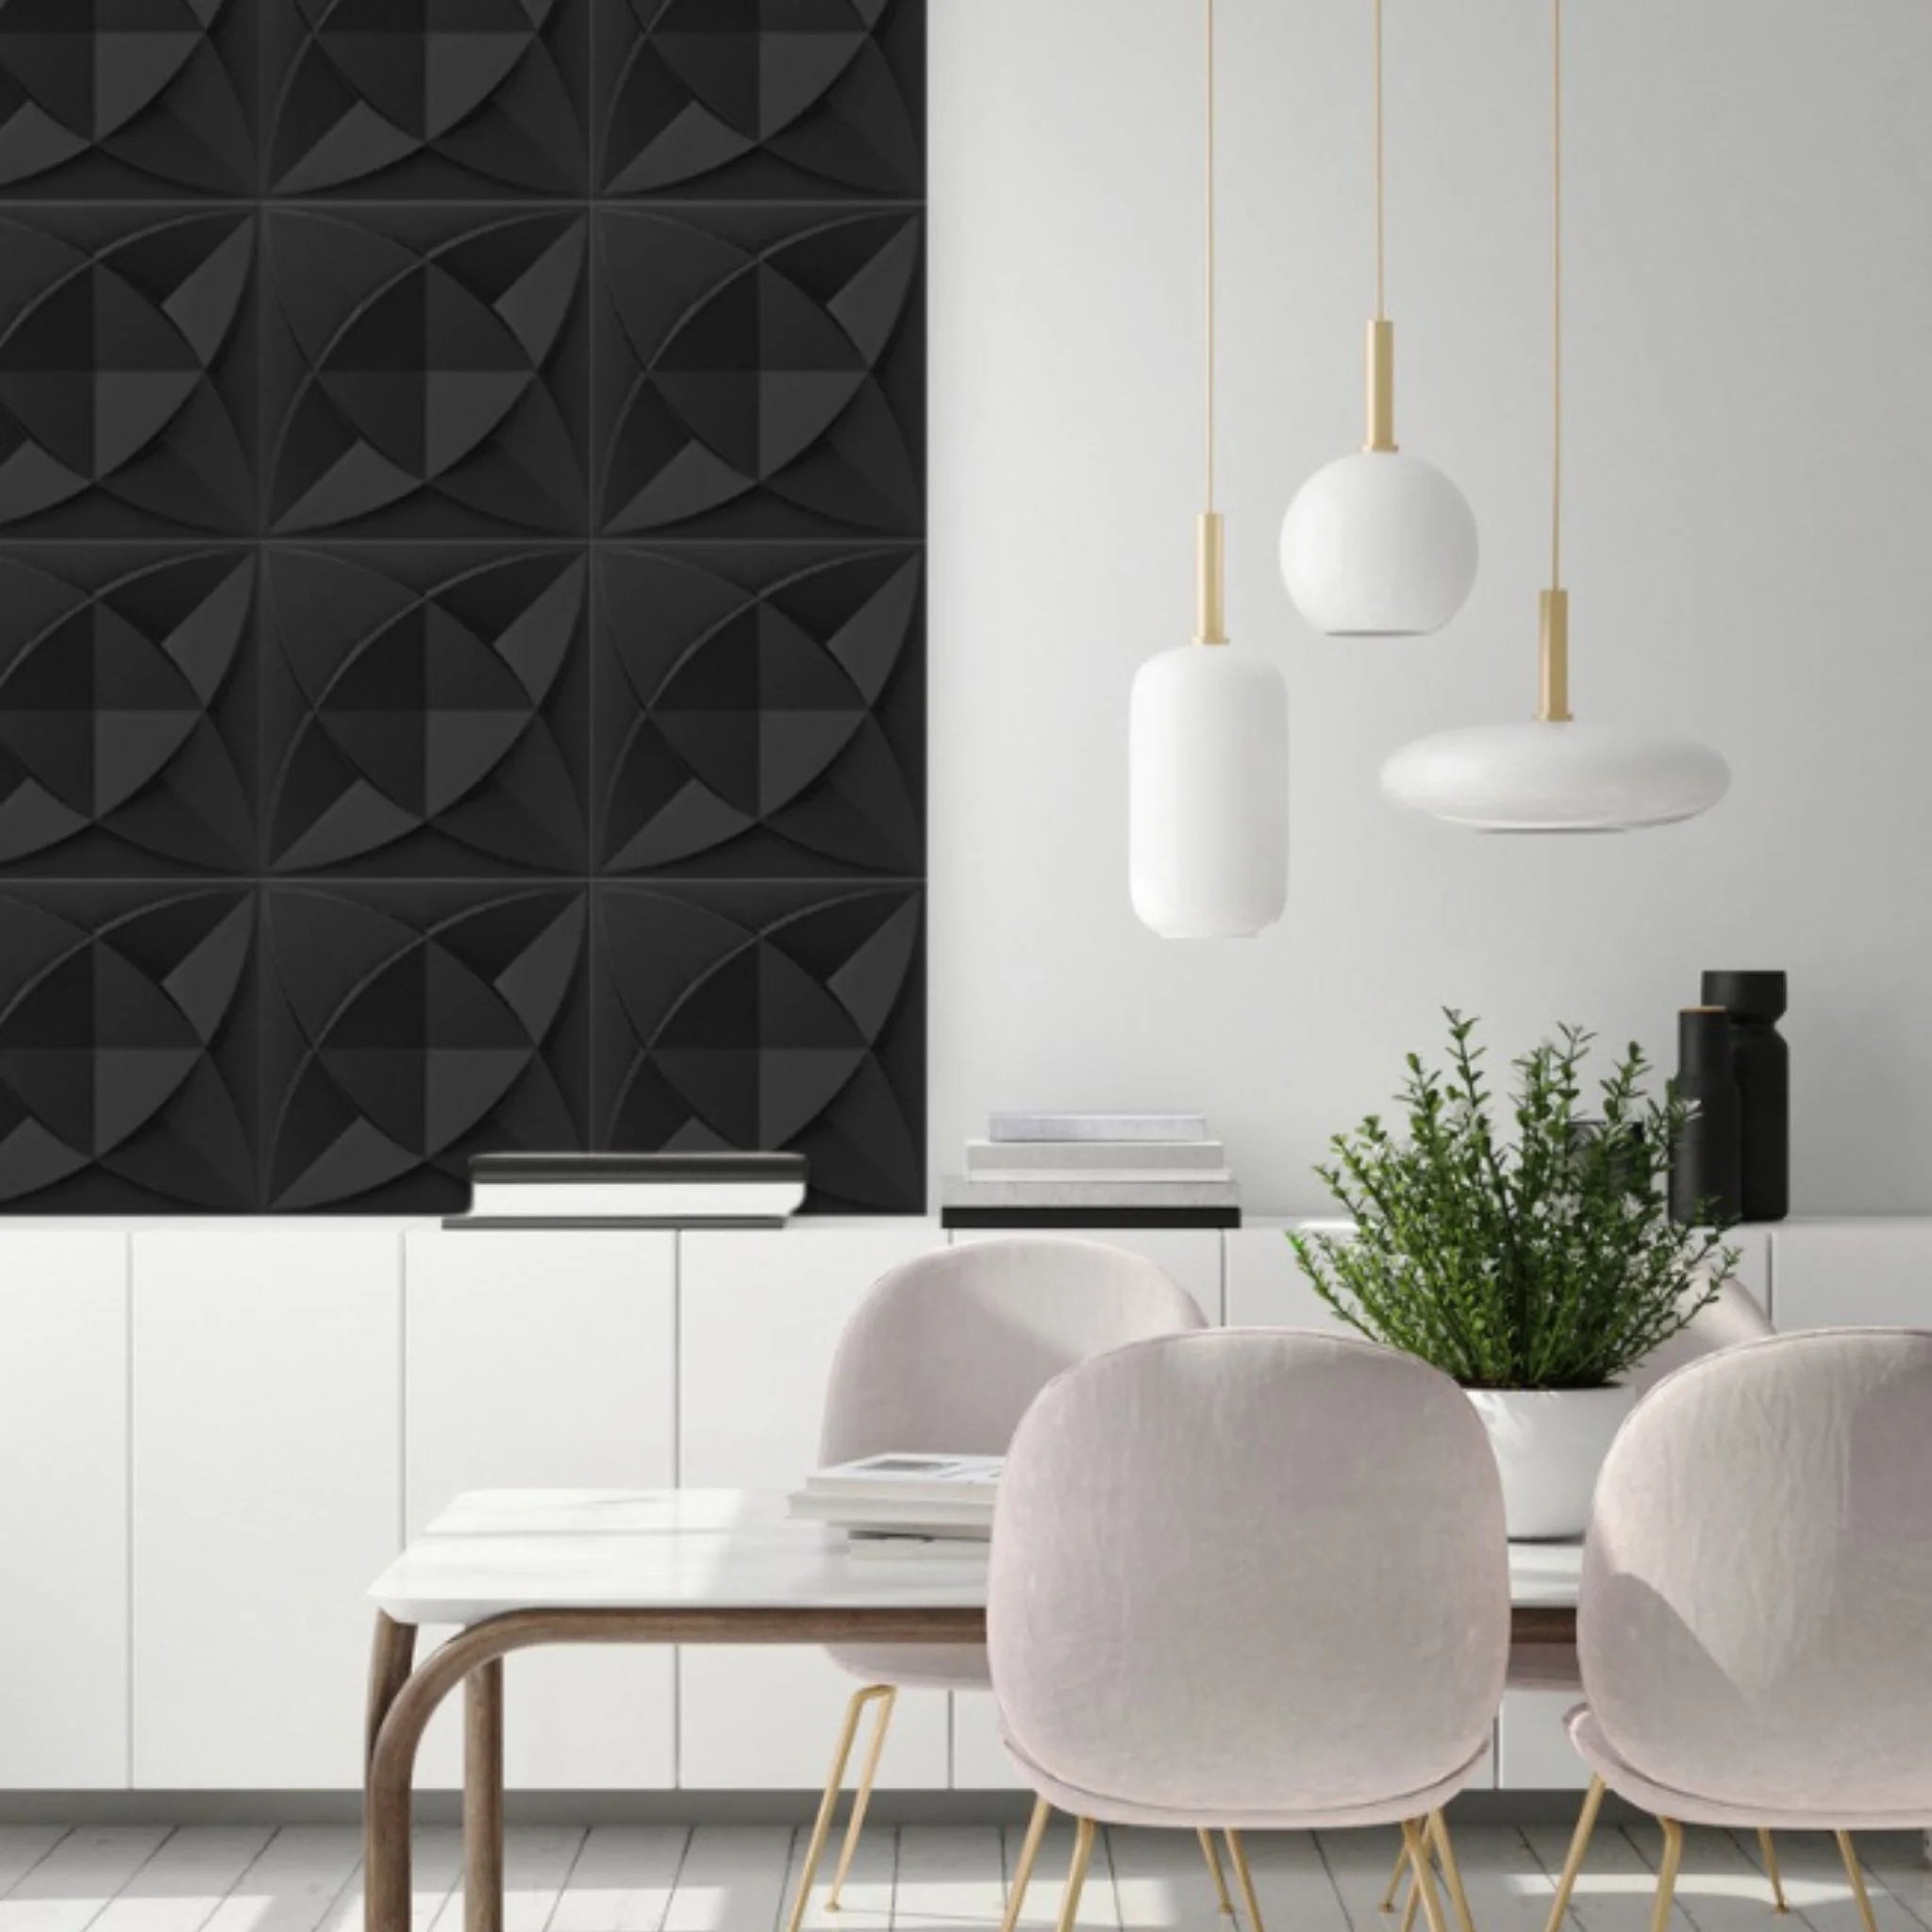 Dining room with black geometric-patterned PVC wall panels and modern decor